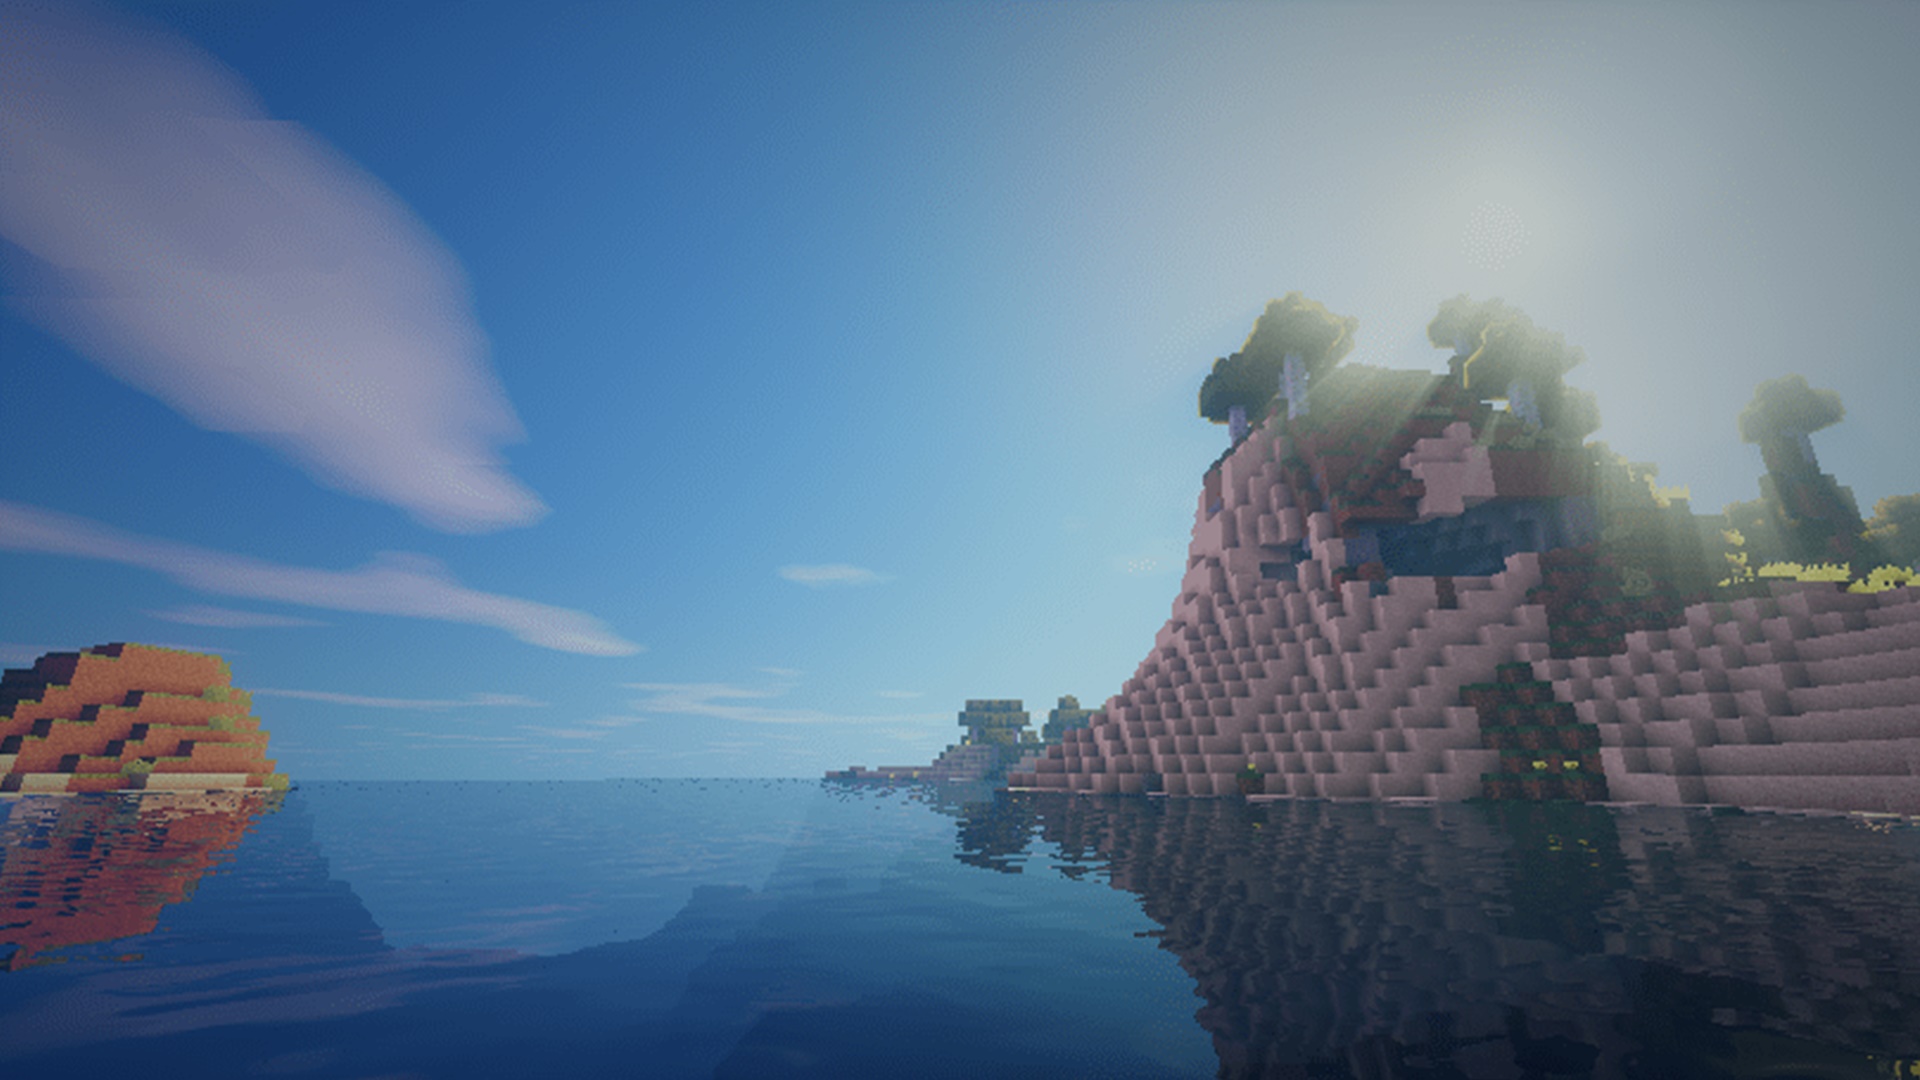 shaders for minecraft pc